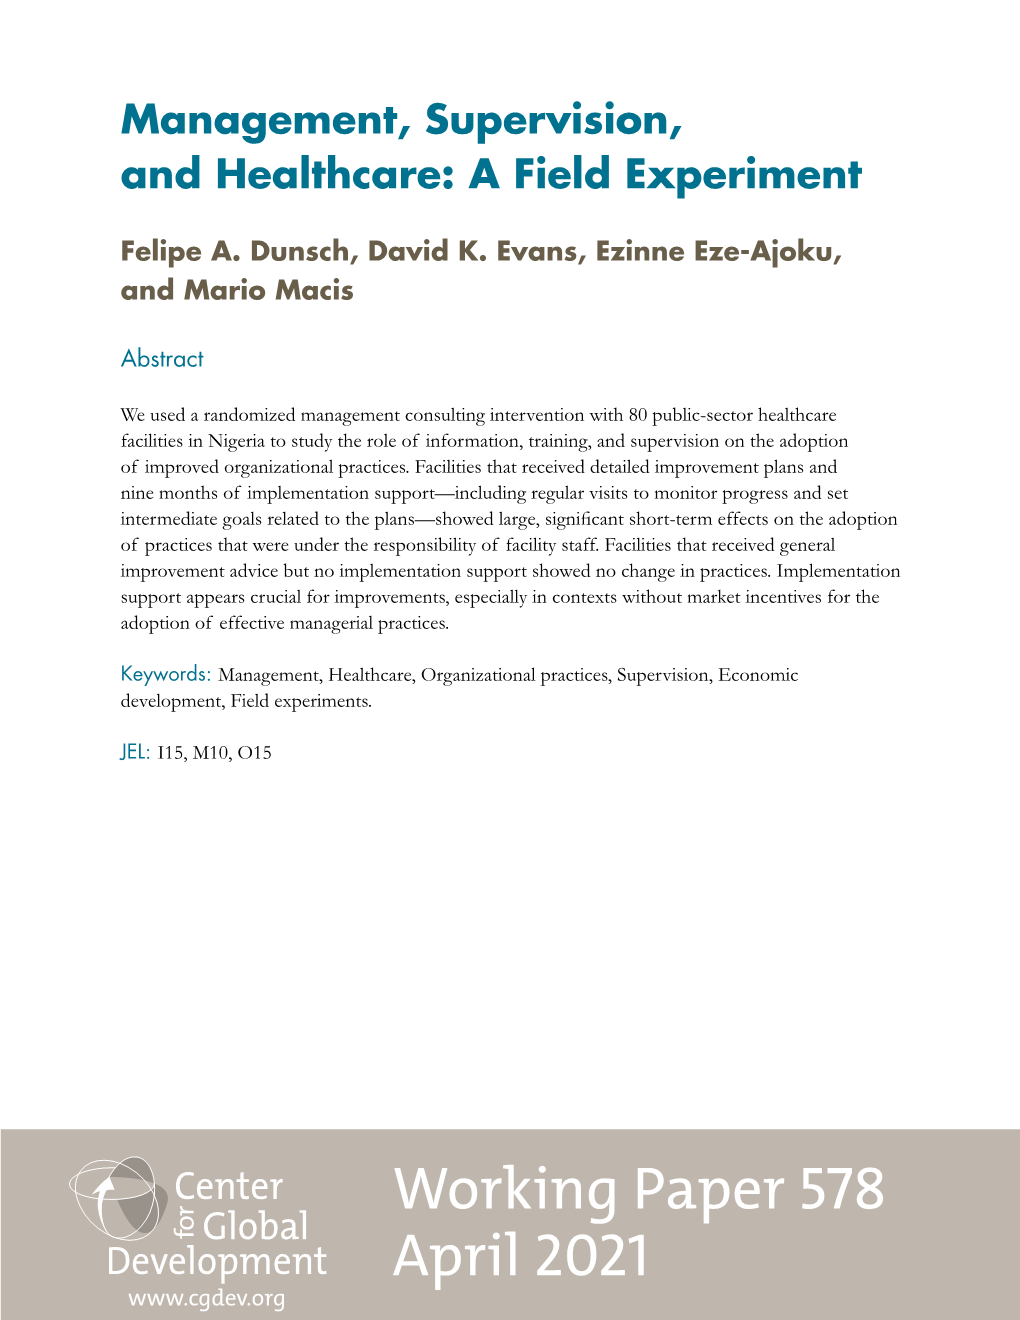 Working Paper 578 April 2021 Management, Supervision, and Healthcare: a Field Experiment